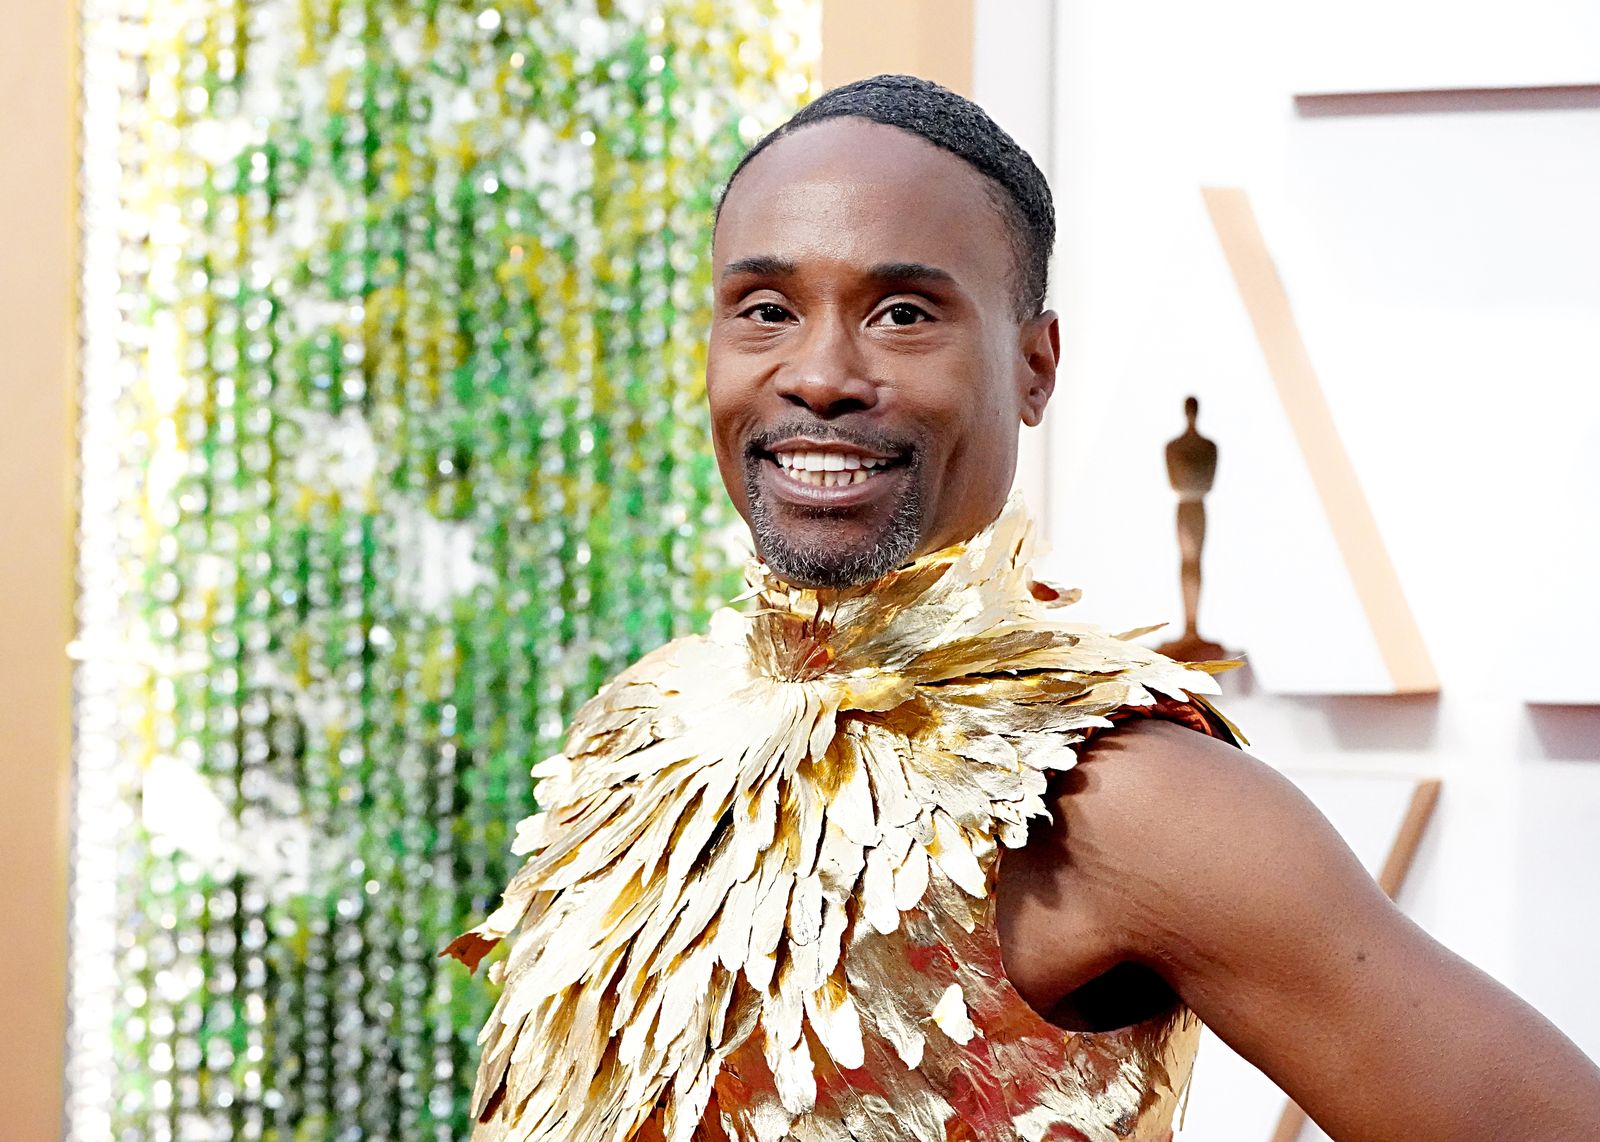 Billy Porter at the 92nd Annual Academy Awards at Hollywood and Highland in Hollywood, California | Photo: Jeff Kravitz/FilmMagic via Getty Images